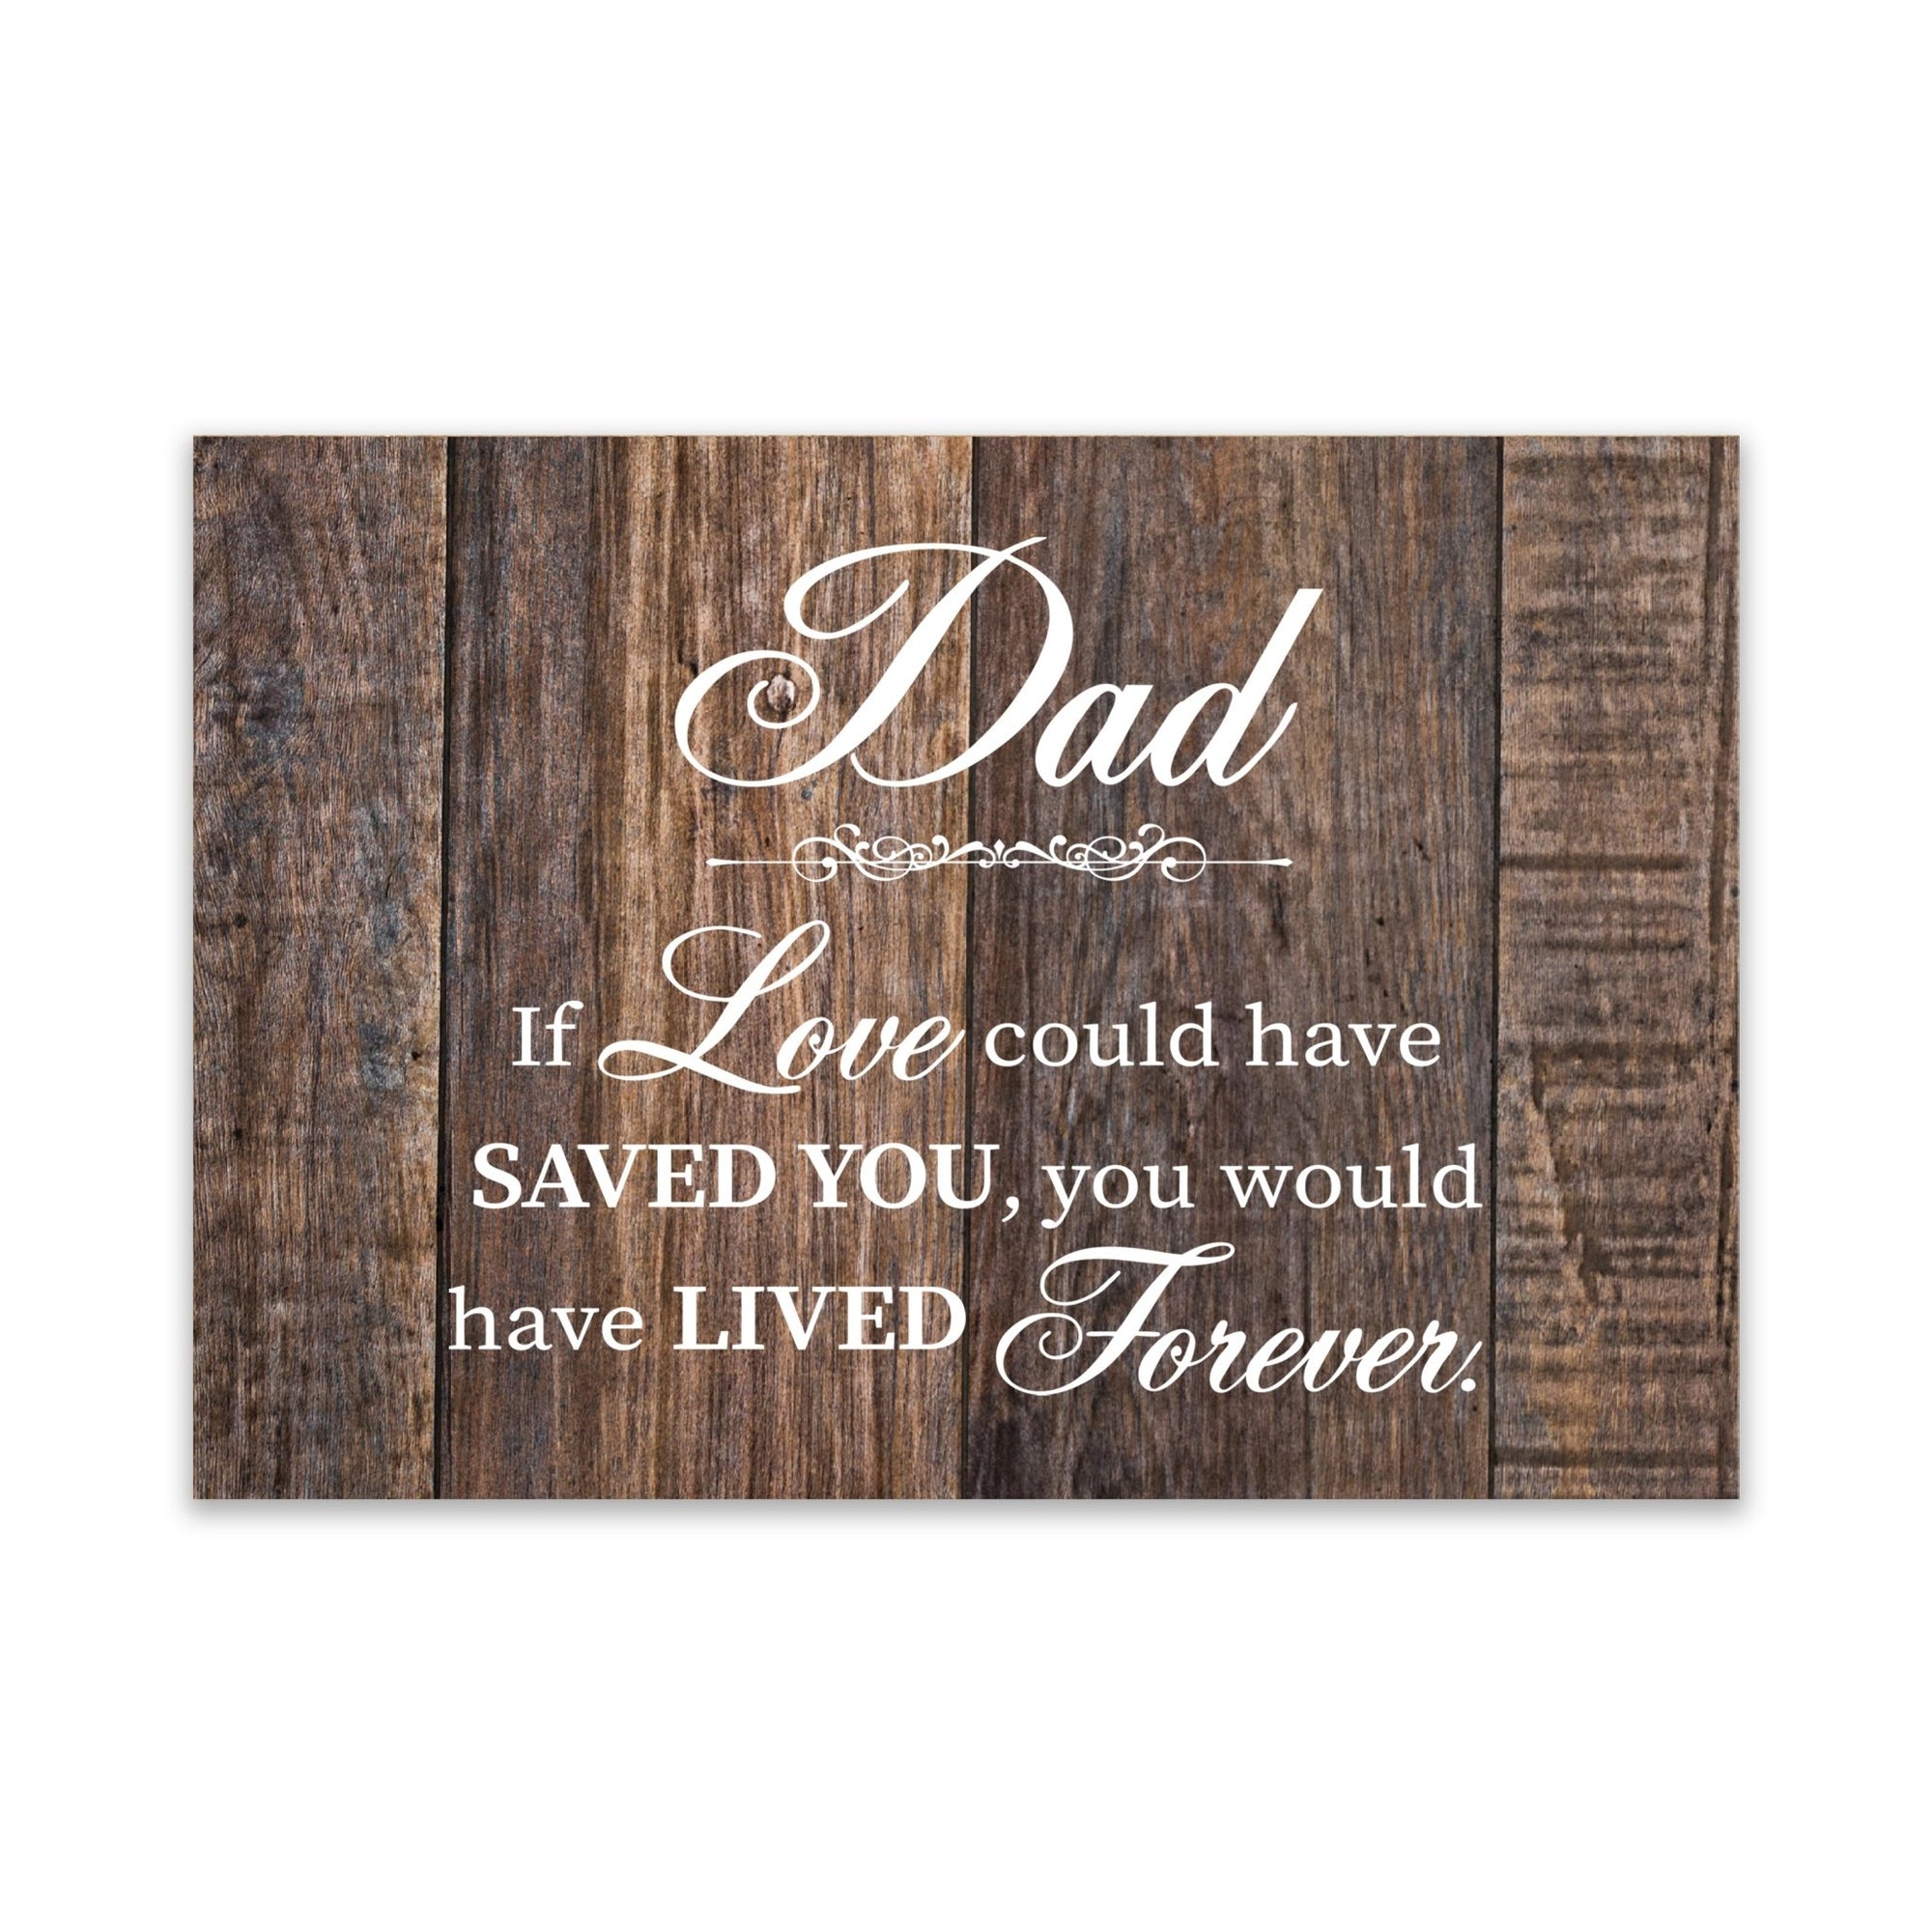 Modern Inspirational Memorial 5.5x 8 inches Wooden Sign Dad, If Love Could - Plaque Tabletop Decoration Loss of Loved One Bereavement Sympathy Keepsake - LifeSong Milestones